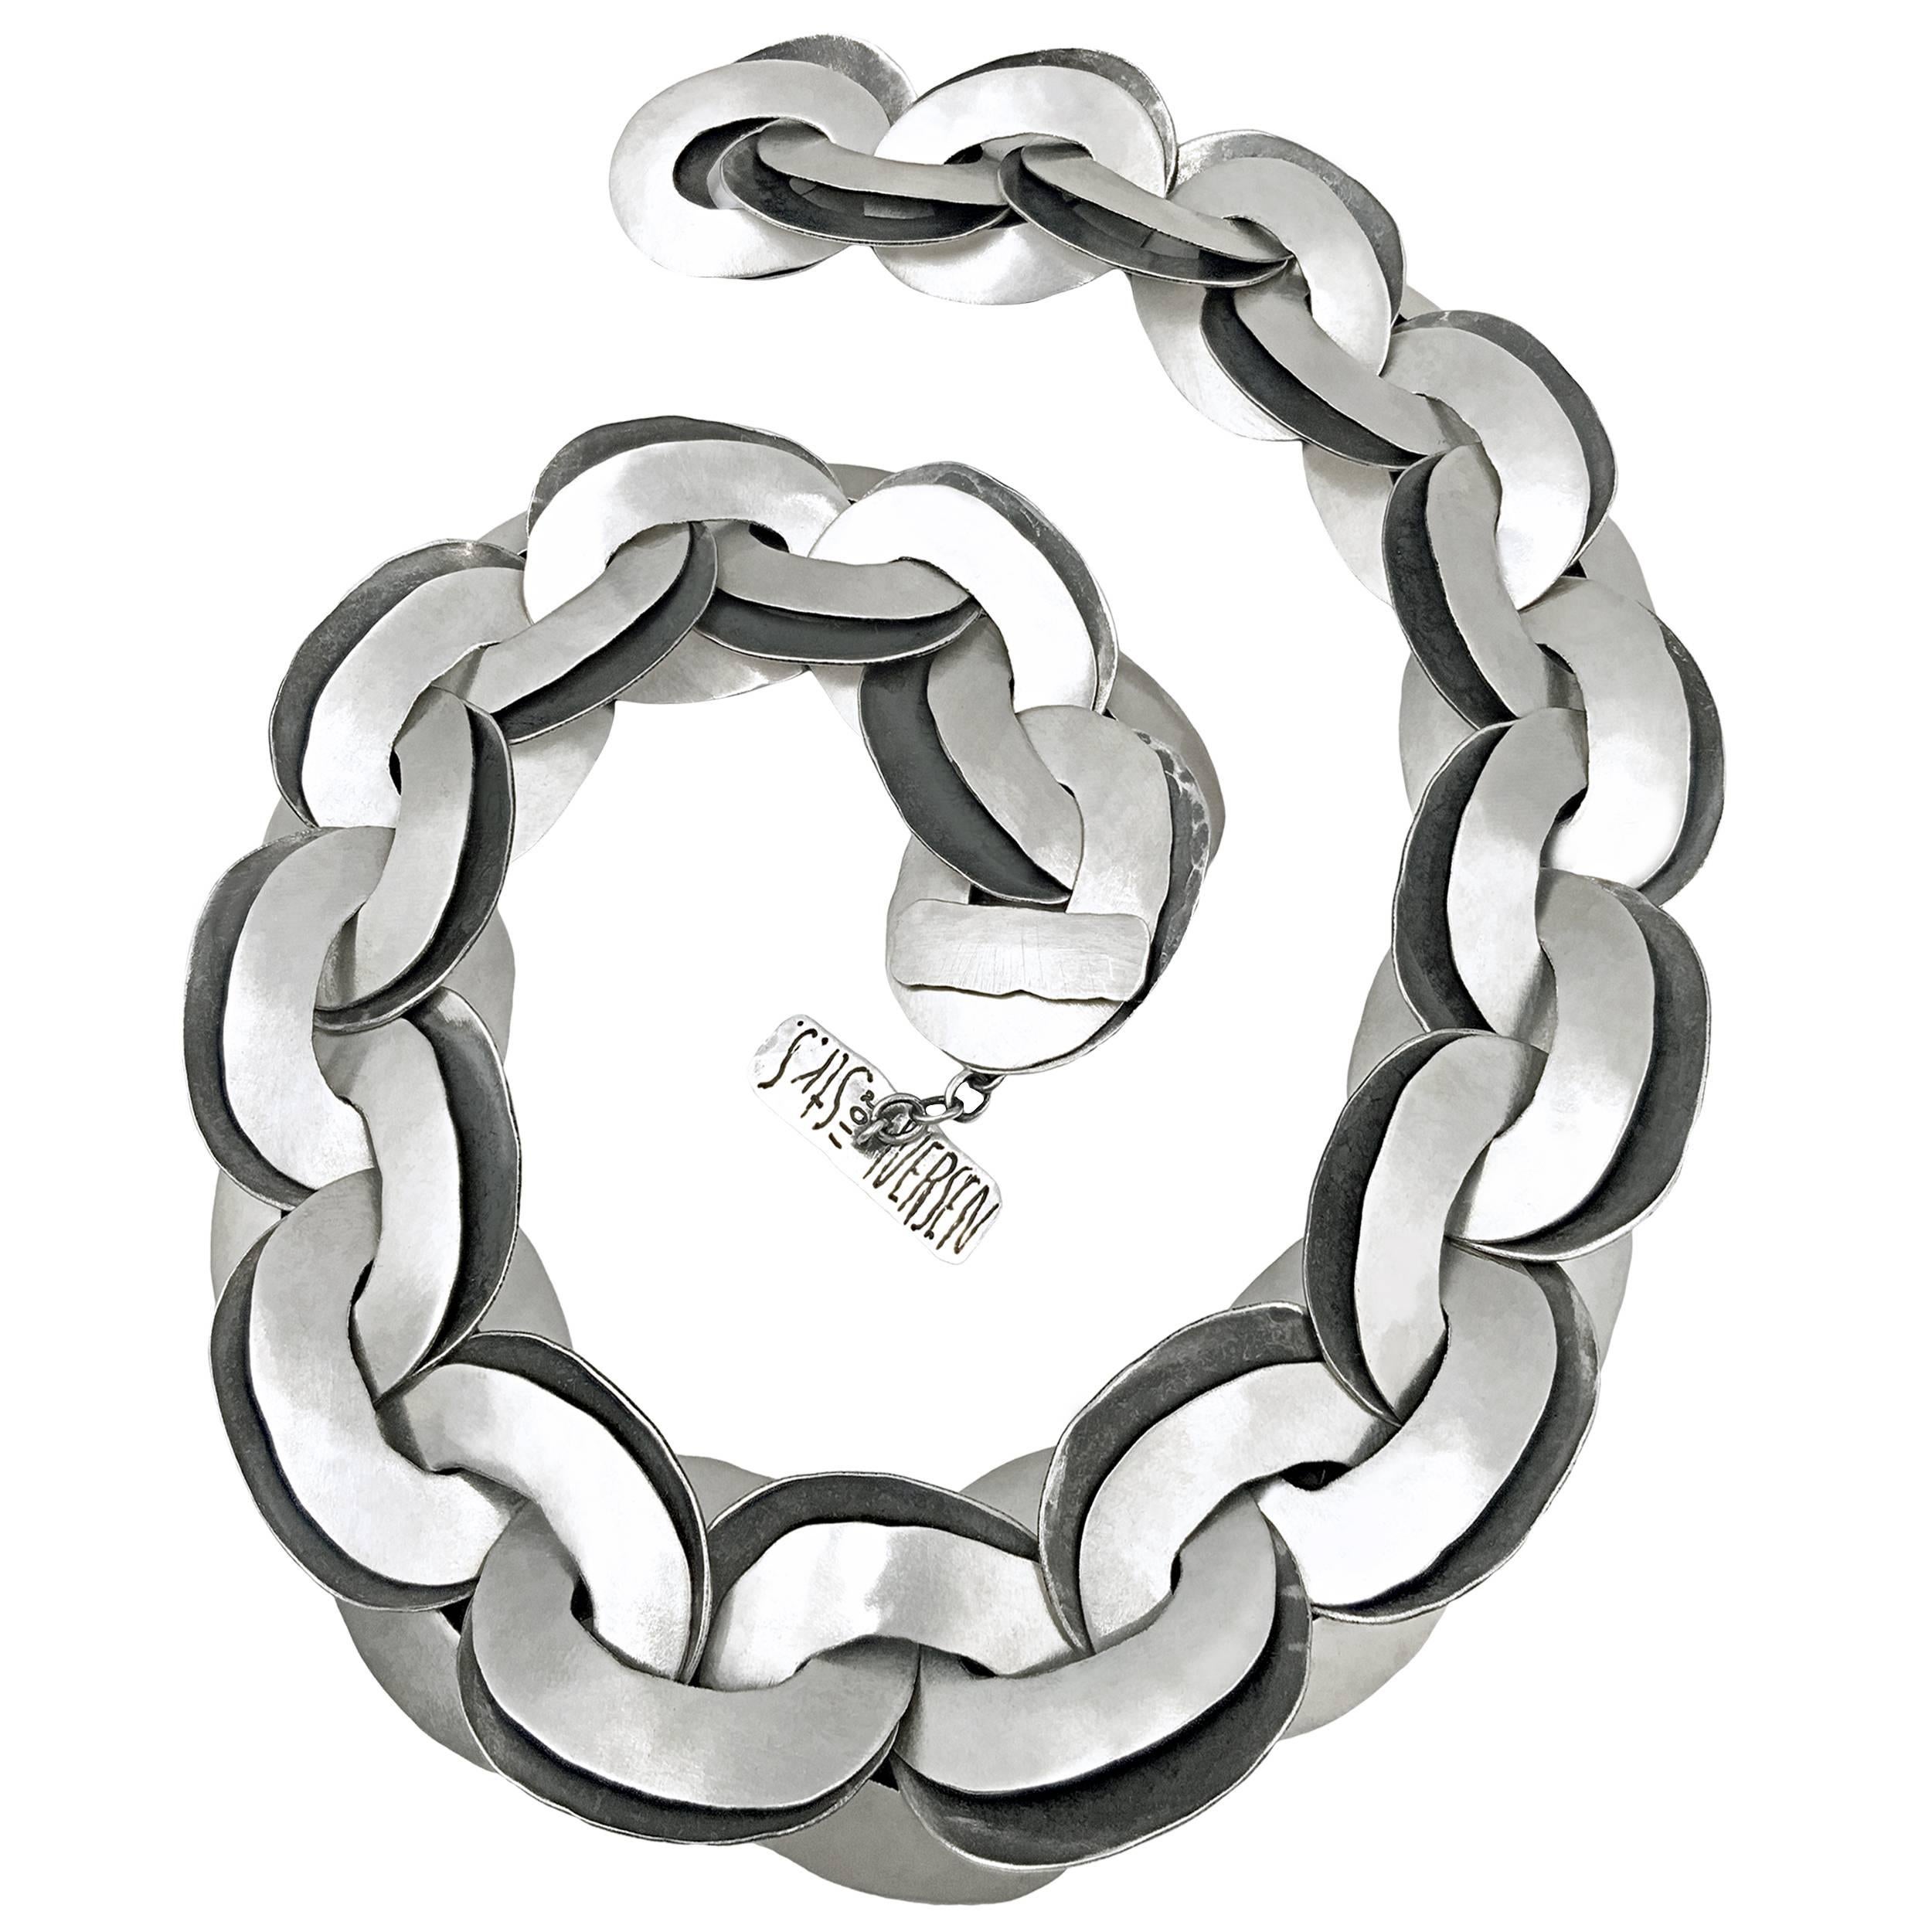 John Iversen Hammered Silver Double Links Chain Necklace